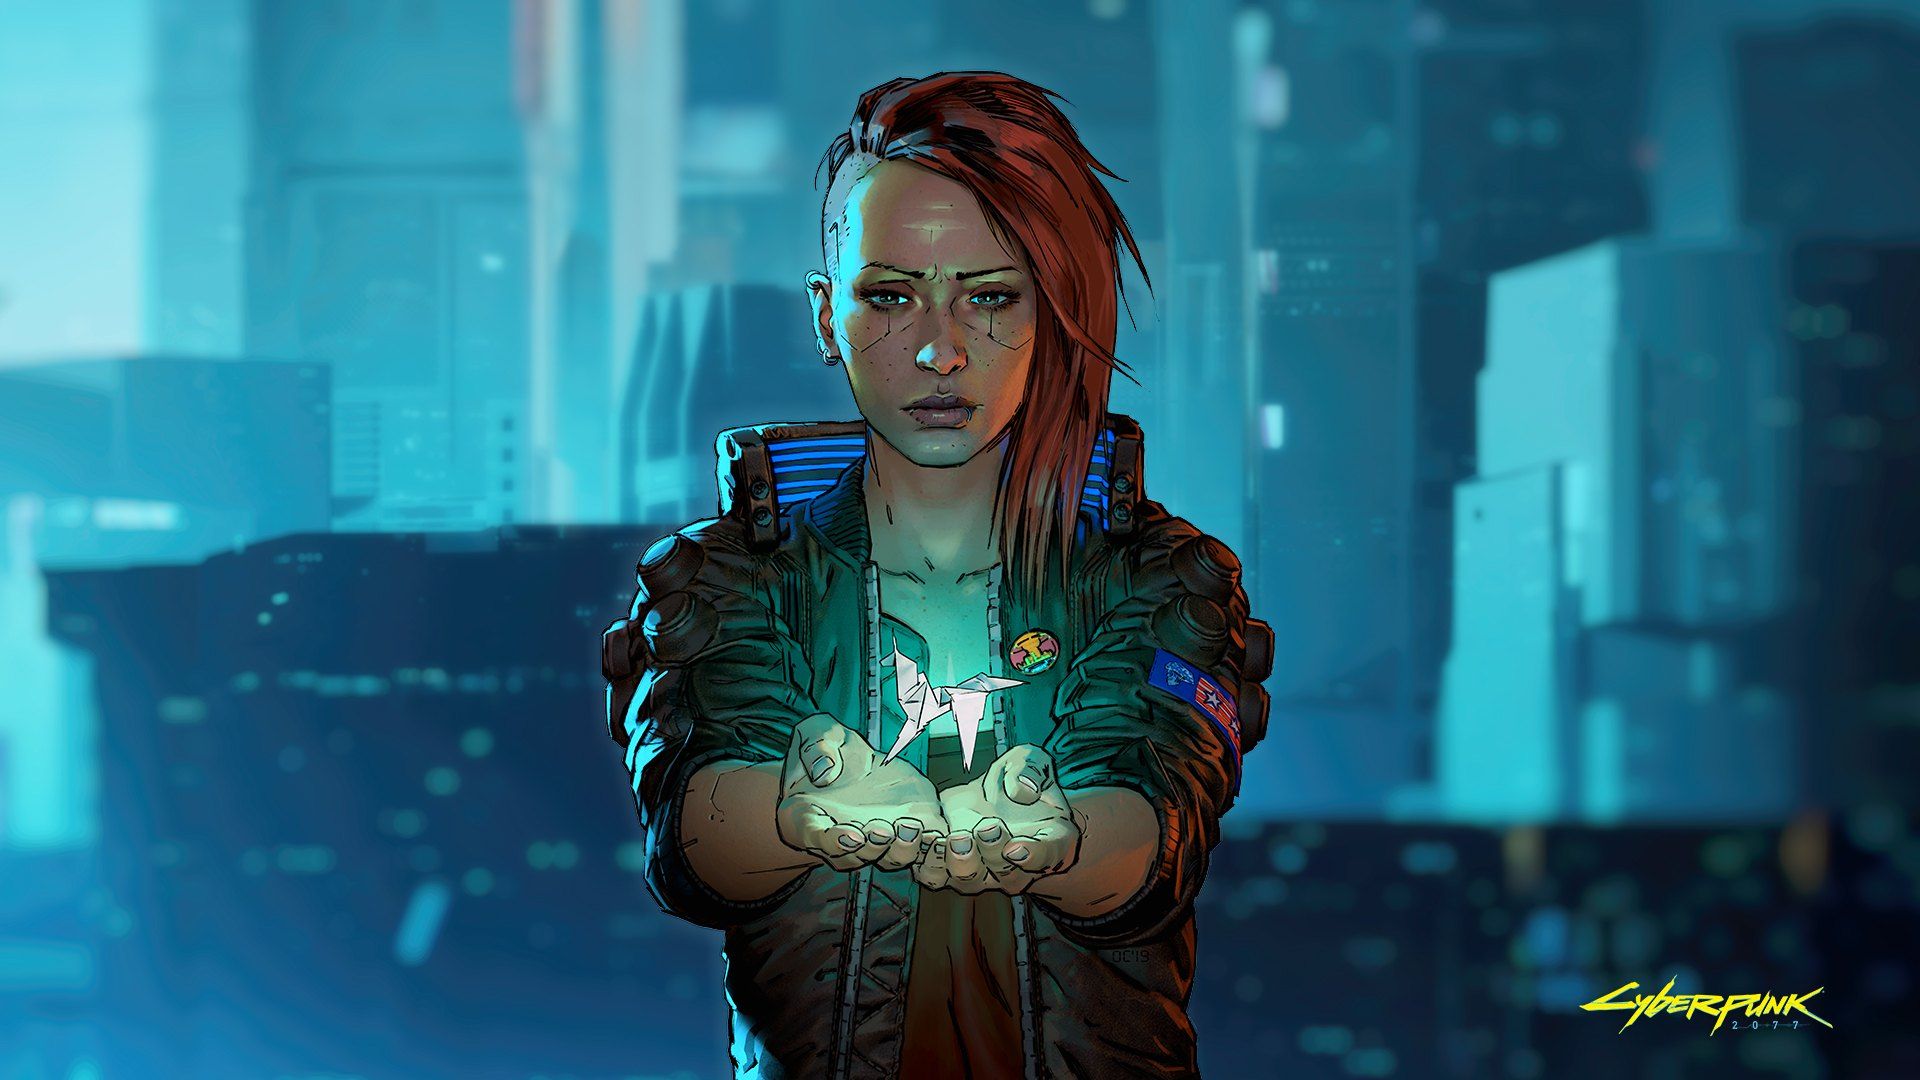 Check out these stunning Cyberpunk 2077 wallpaper